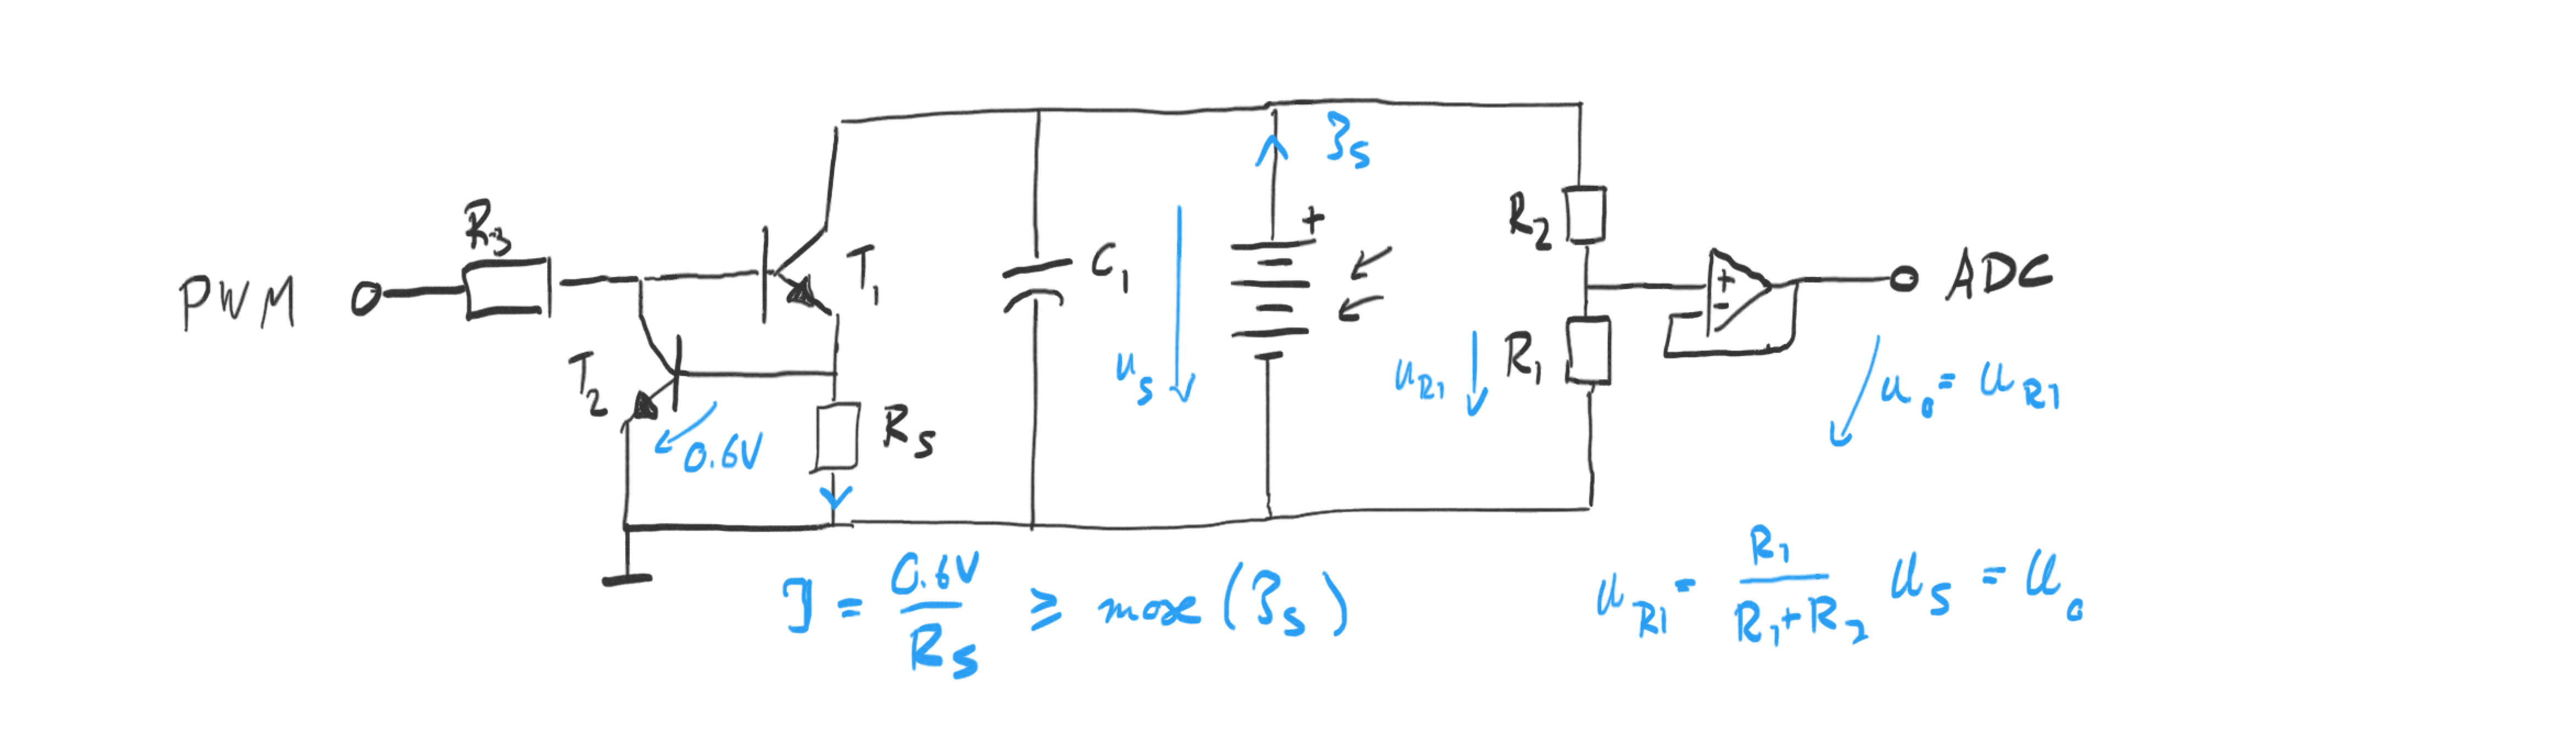 Solar cell characterization circuit